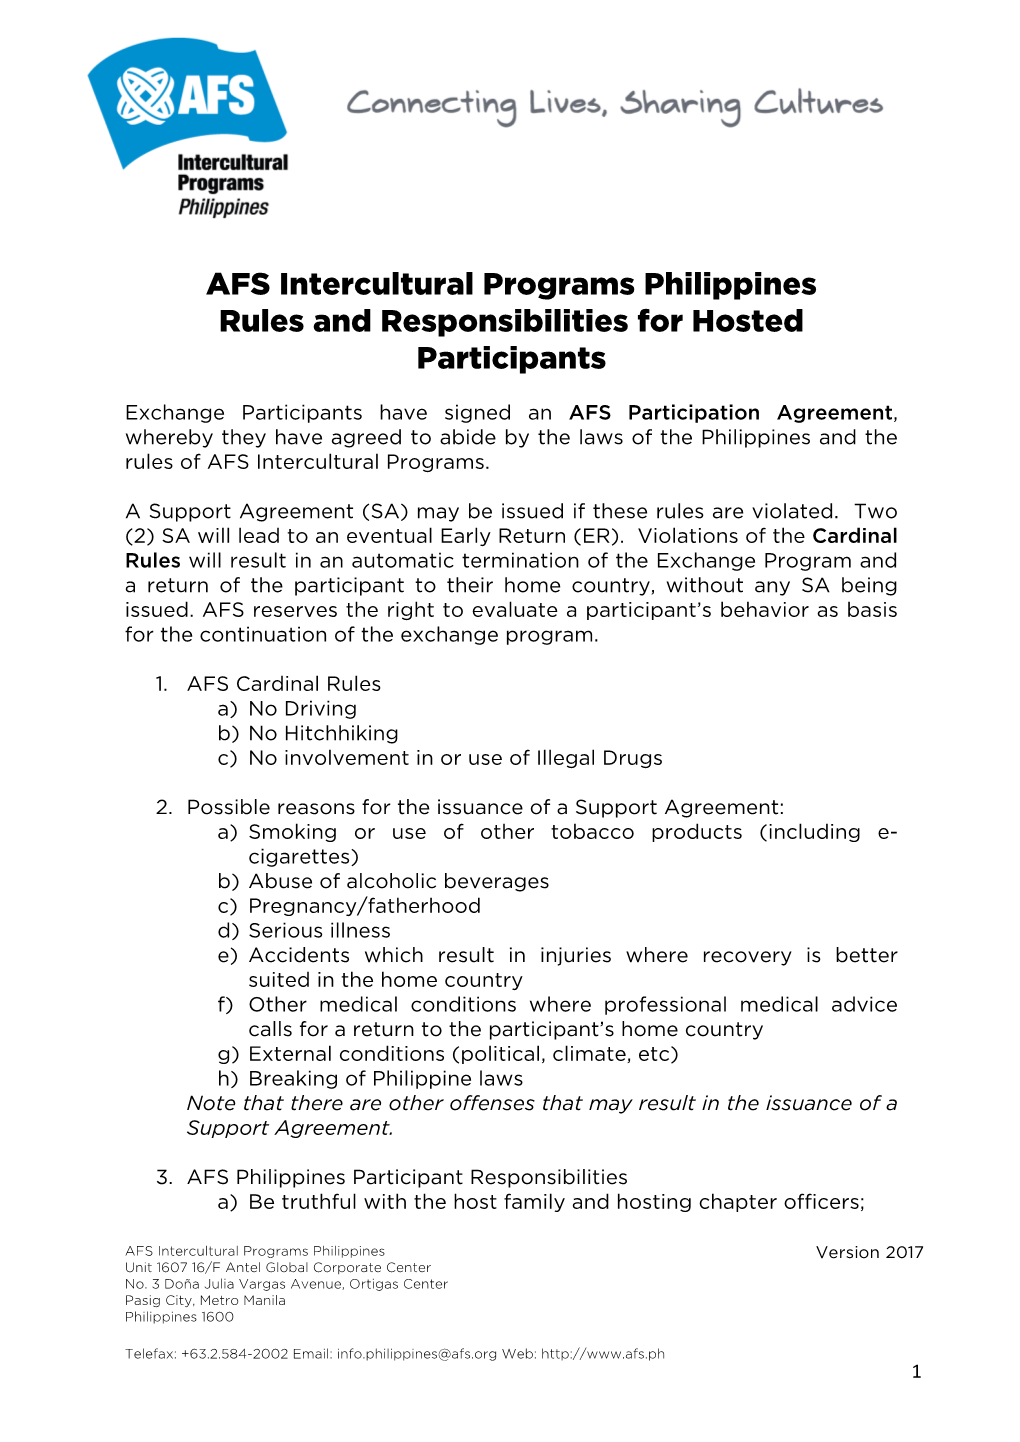 AFS Intercultural Programs Philippines Rules and Responsibilities for Hosted Participants